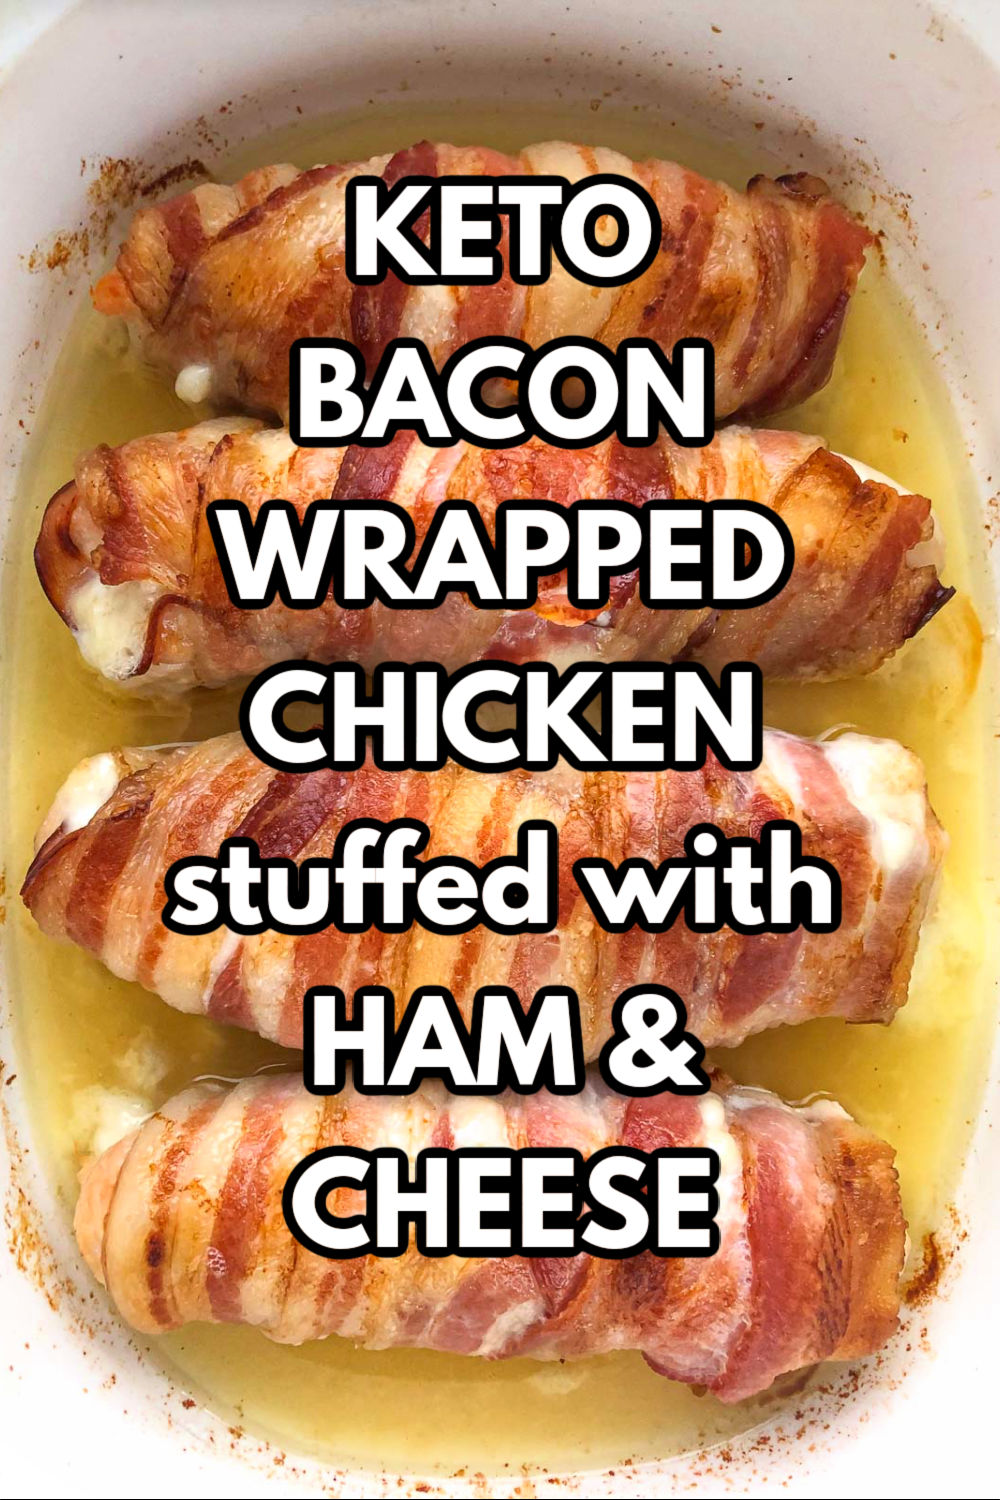 aerial view of baking dish with bacon wrapped chicken of white plate and baking dish with bacon wrapped chicken with text